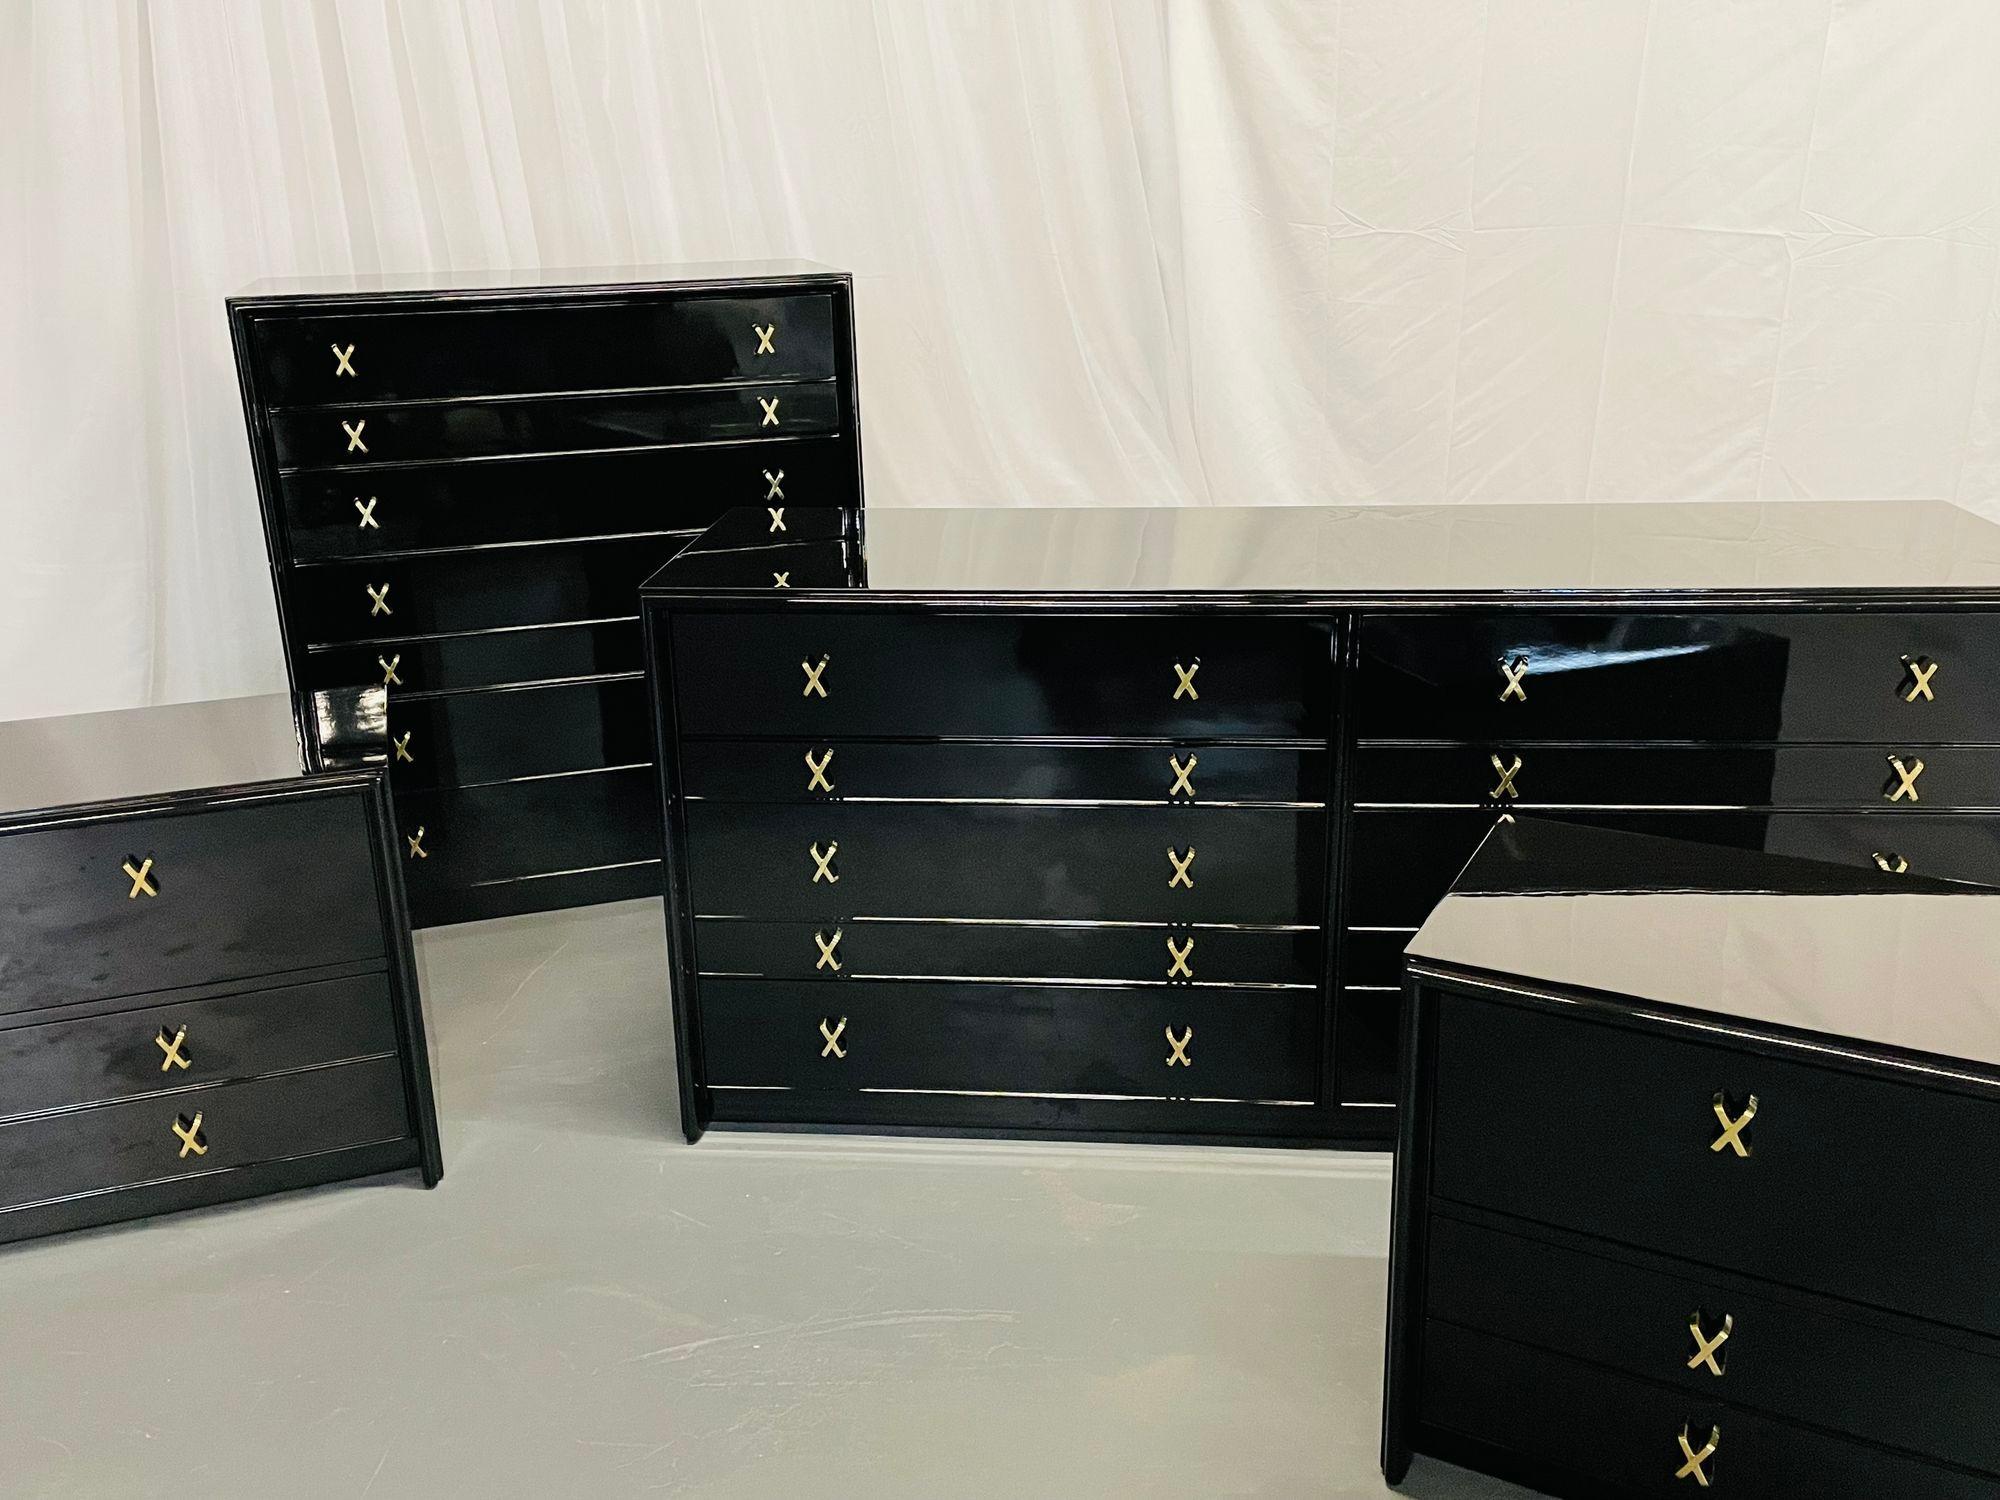 Paul Frankl Mid Century Modern John Stuart Bedroom Set, Ebony Lacquer Refinished
One of a kind fully refinished bedroom set consisting of a dresser and a high chest. A simply stunning bedroom set fully refurbished and lacquered in a black Steinway